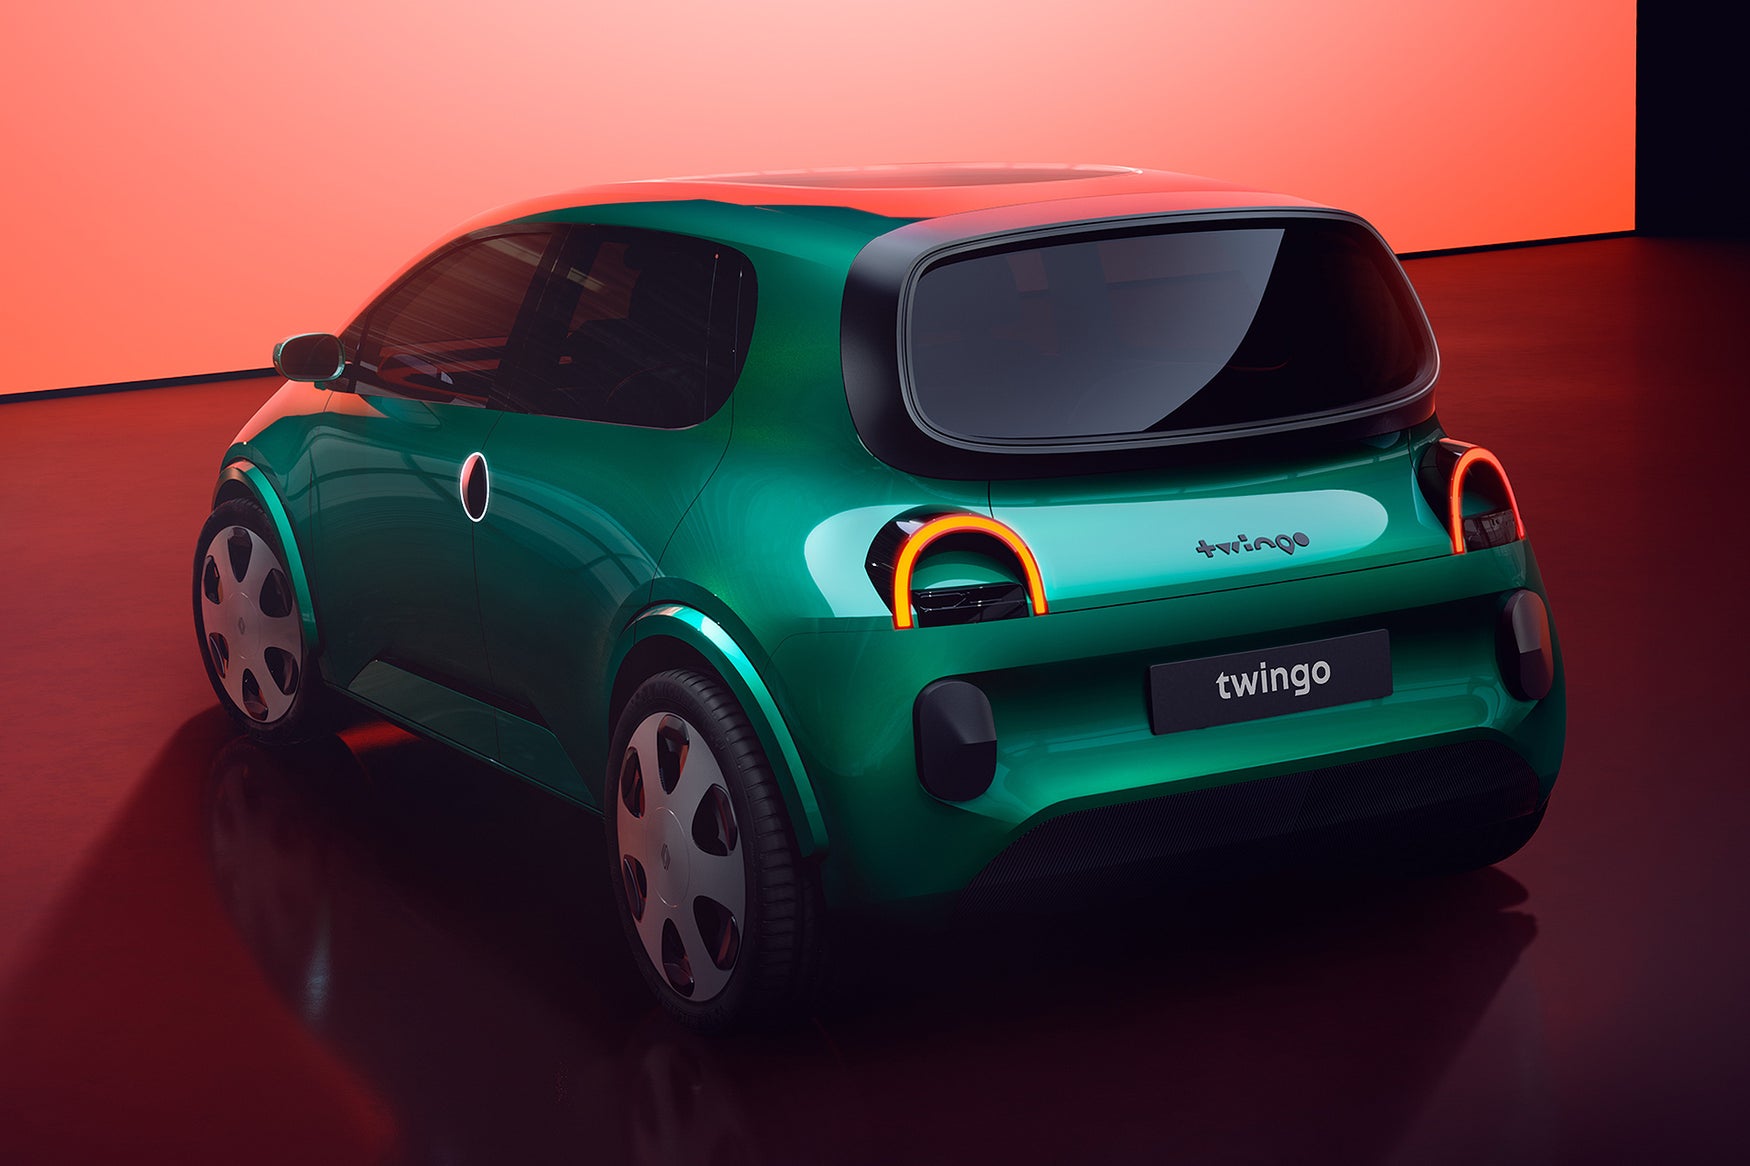 New 2026 Renault Twingo small electric car